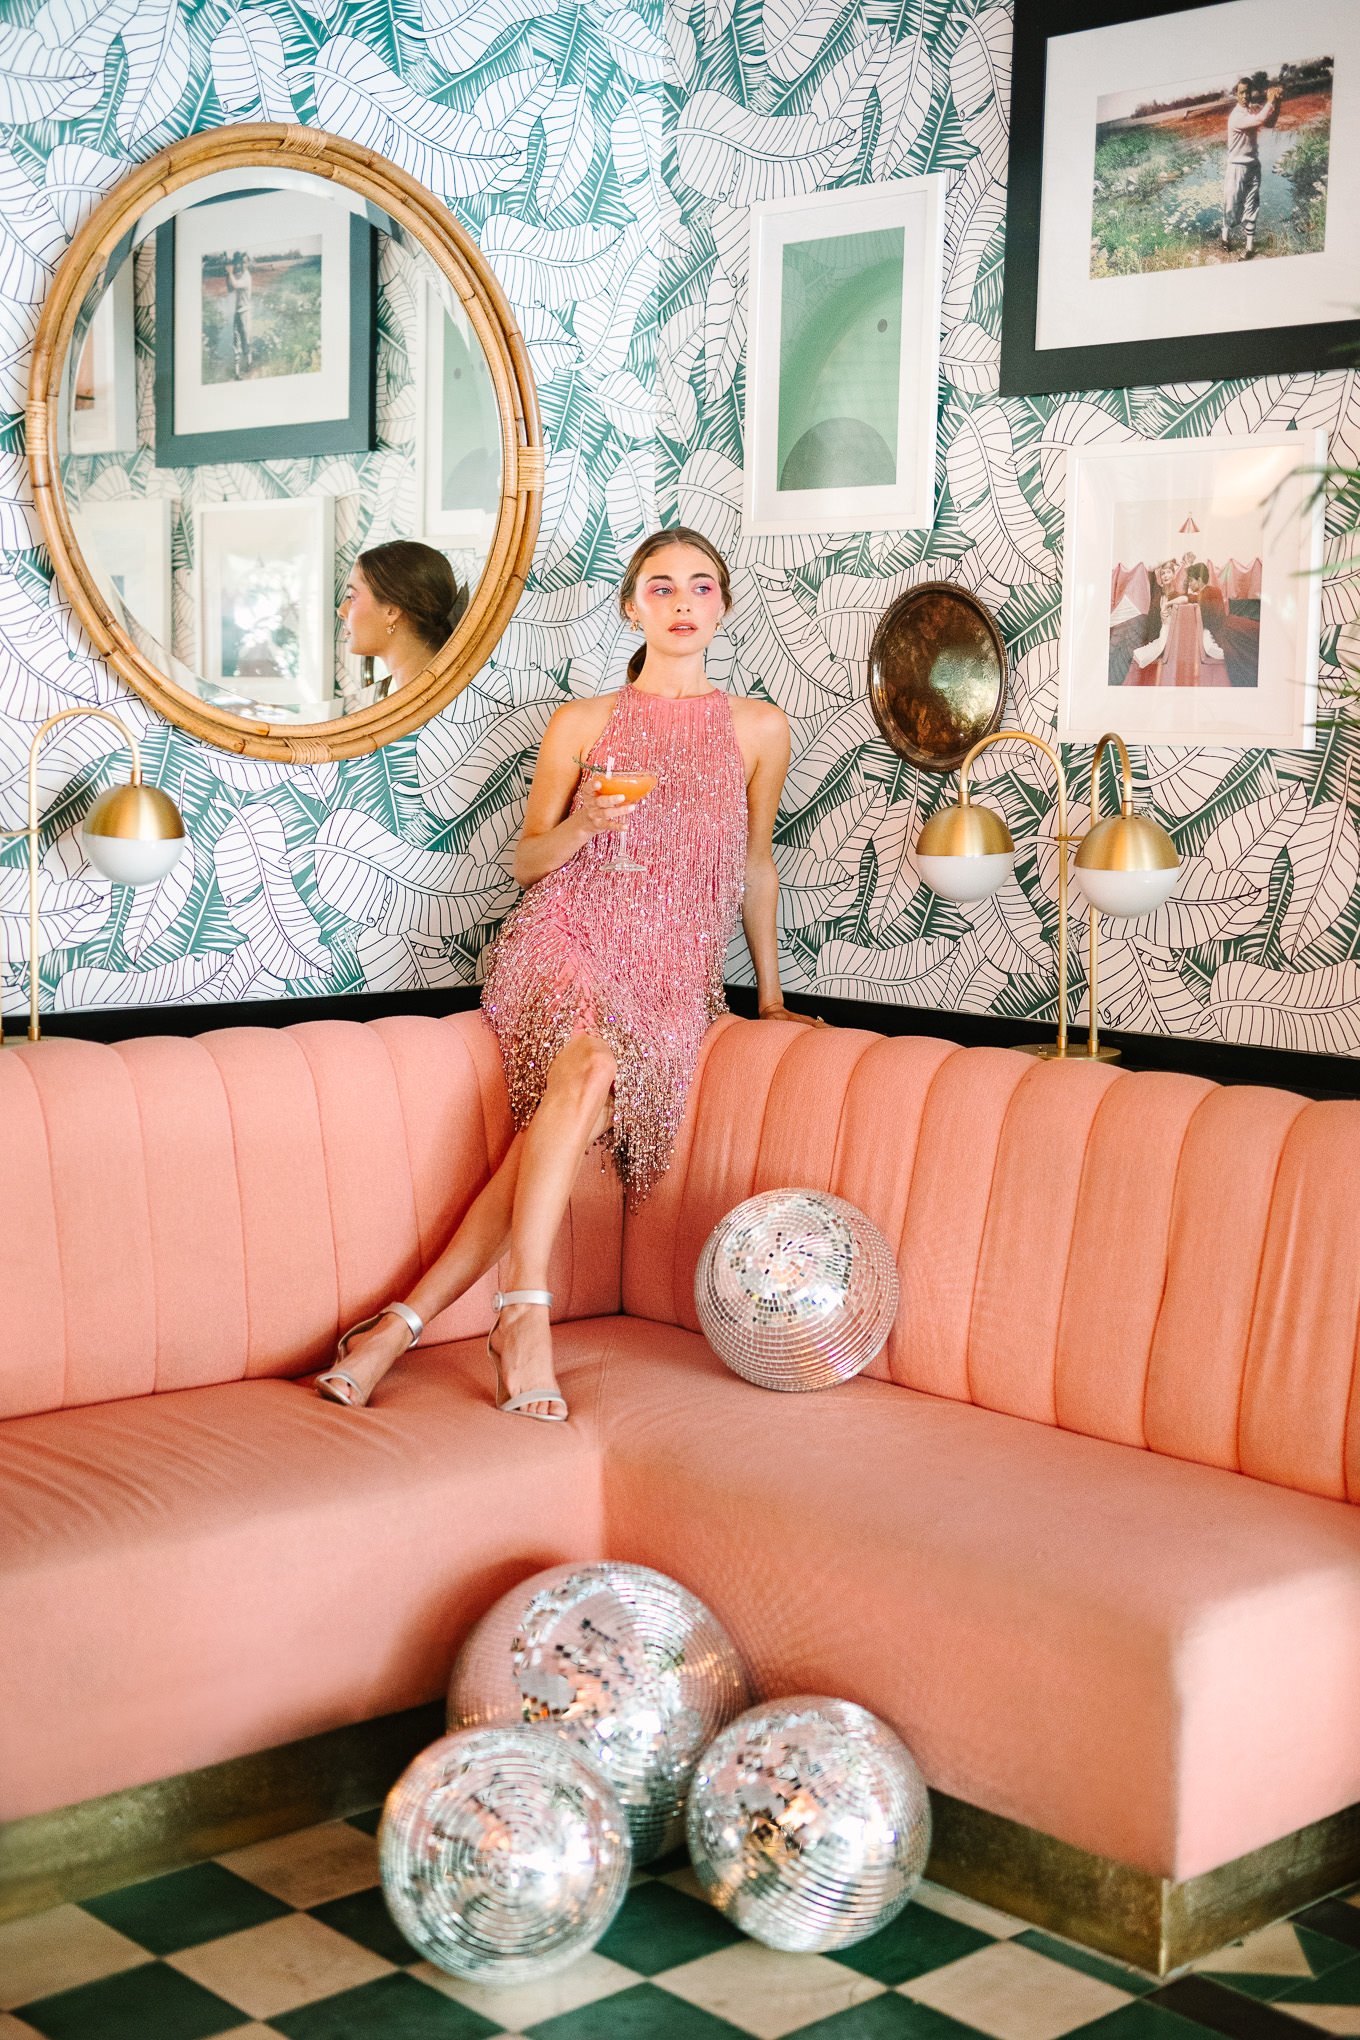 Naeem Khan pink fringe dress in Pink Cabana Restaurant | Kindred Presets x Mary Costa Photography Sands Hotel Ad Campaign | Colorful Palm Springs wedding photography | #palmspringsphotographer #lightroompresets #sandshotel #pinkhotel   Source: Mary Costa Photography | Los Angeles